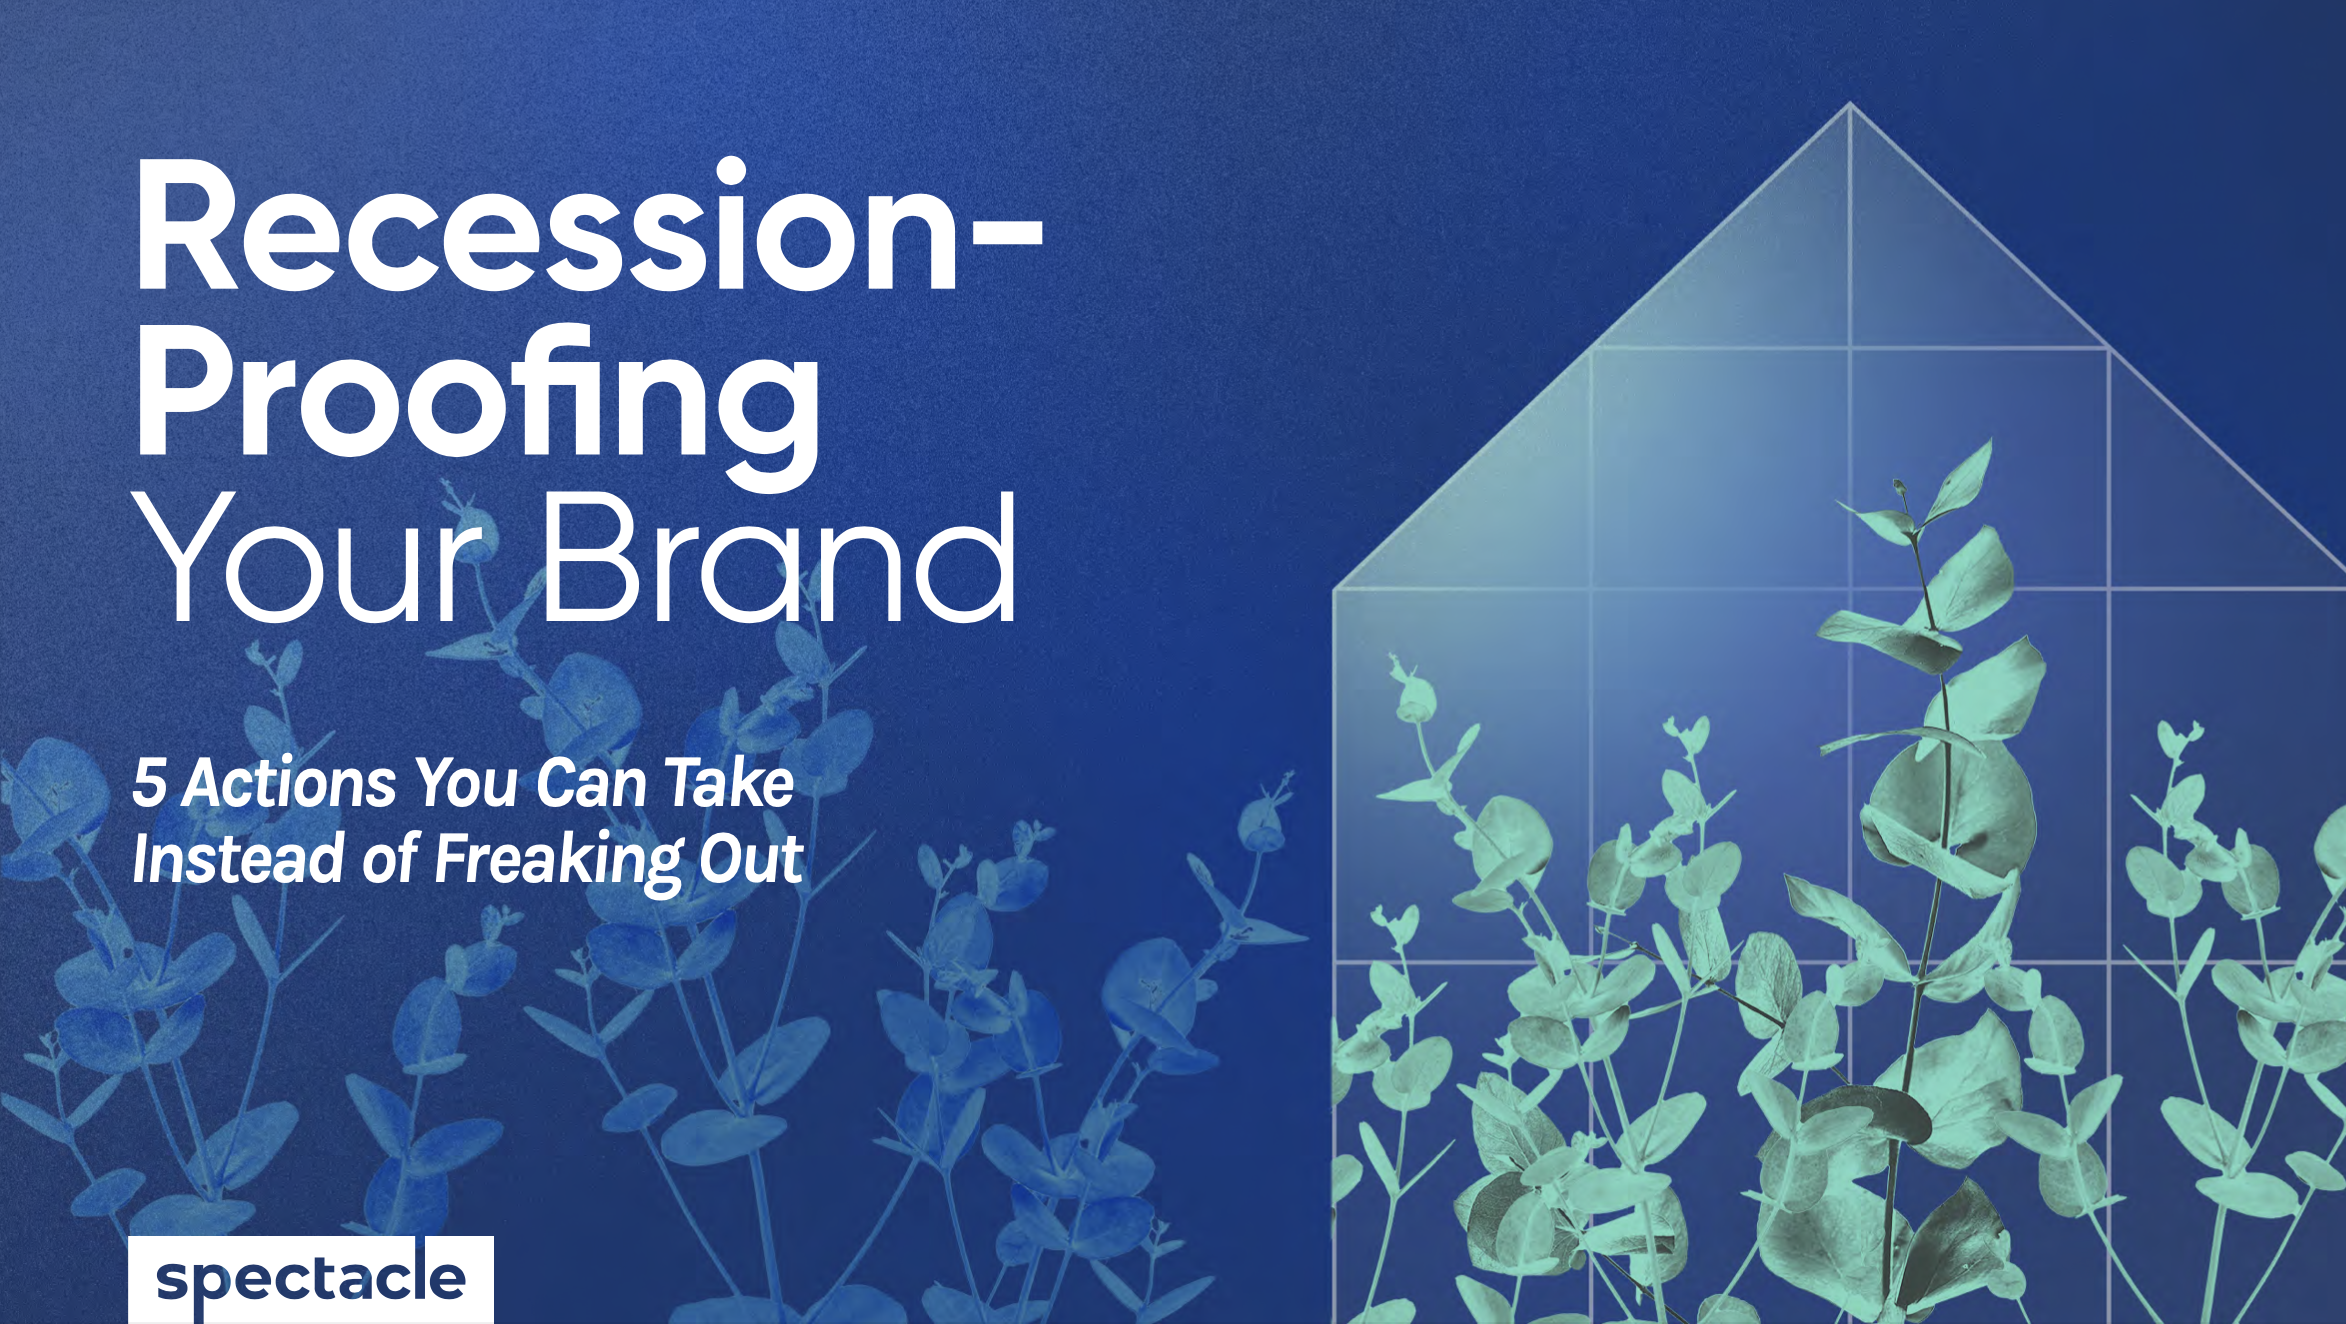 Recession Proofing Your Brand eBook Cover